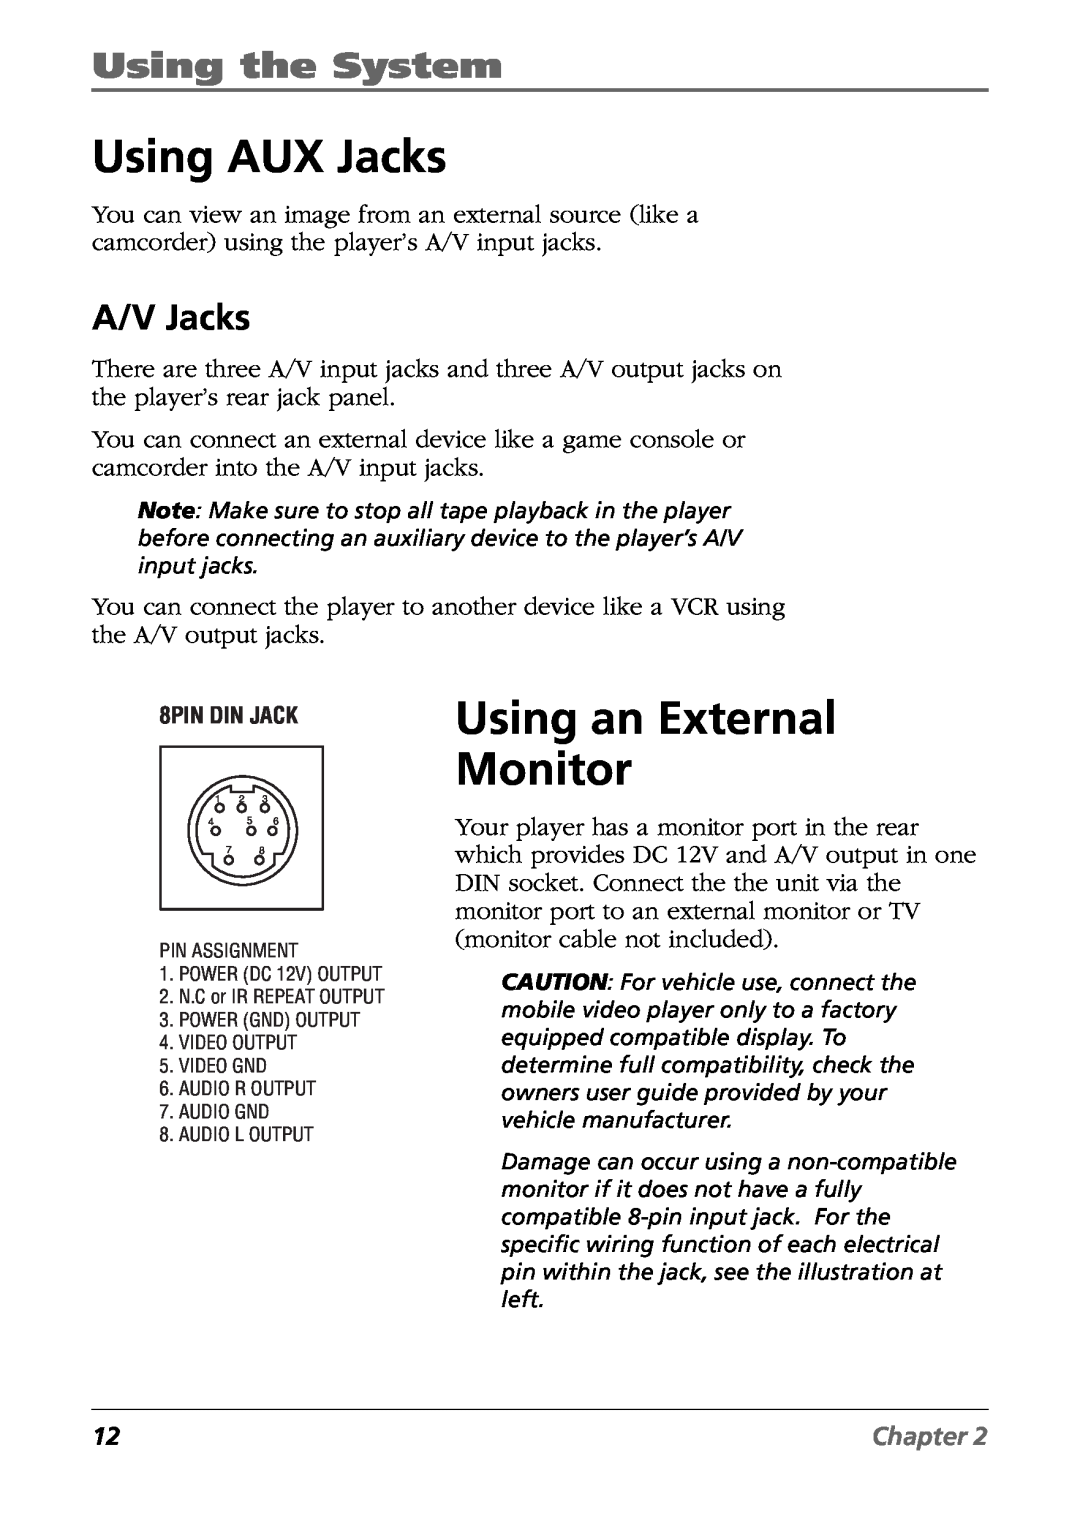 RCA Mobile Video Cassette Player manual Using AUX Jacks, Using an External Monitor, A/V Jacks, Using the System, Chapter 